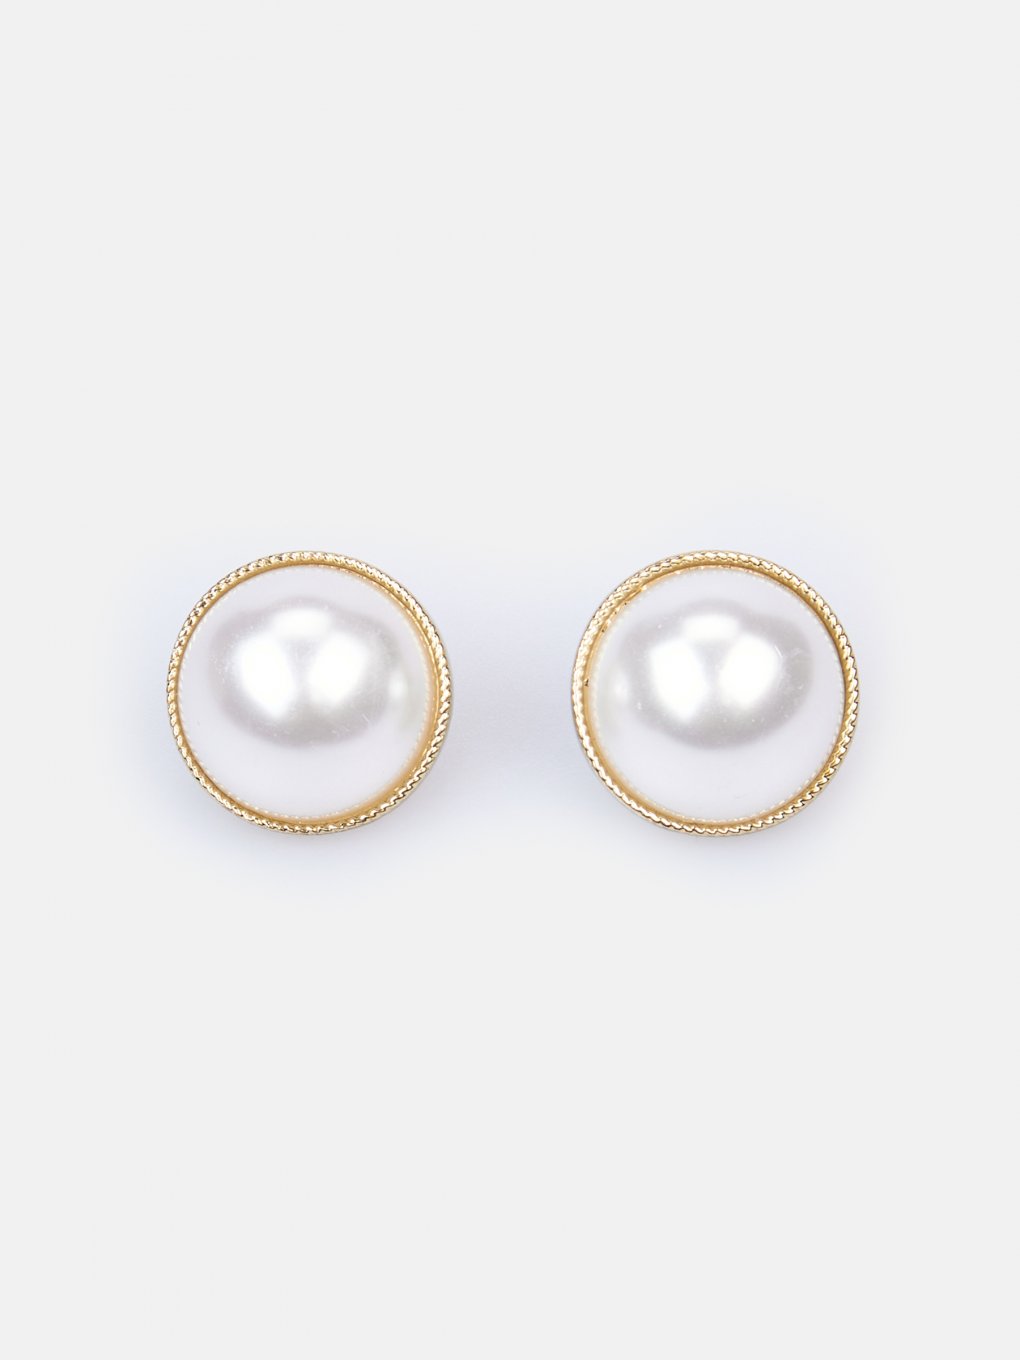 Earrings with faux pearl